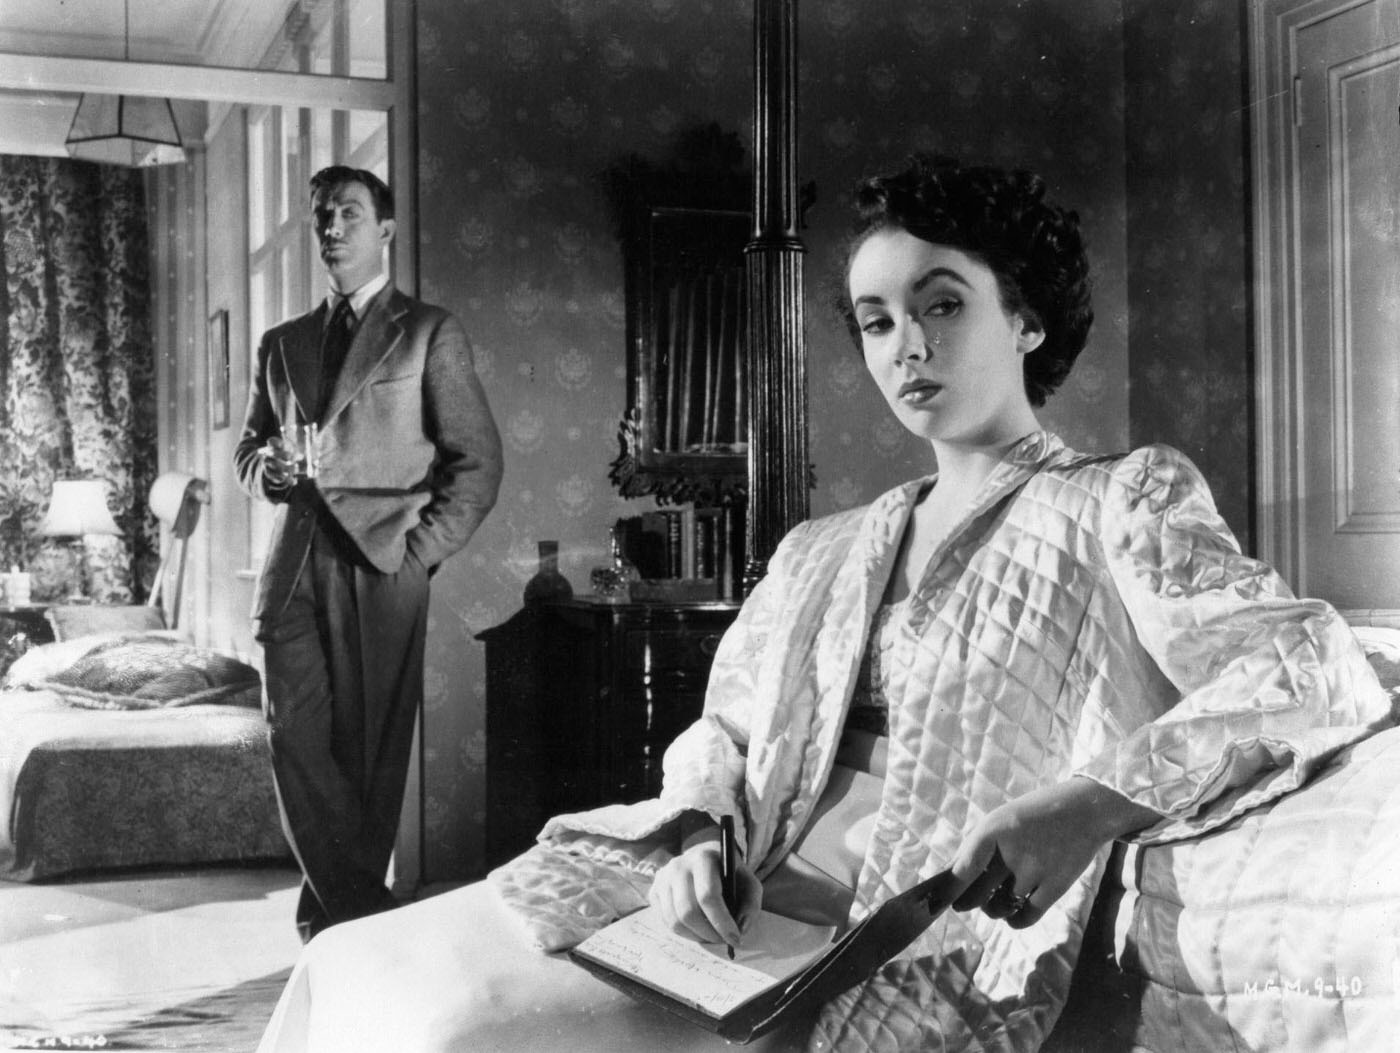 Robert Taylor watches Elizabeth Taylor in a scene from the film 'Conspirator', 1949.